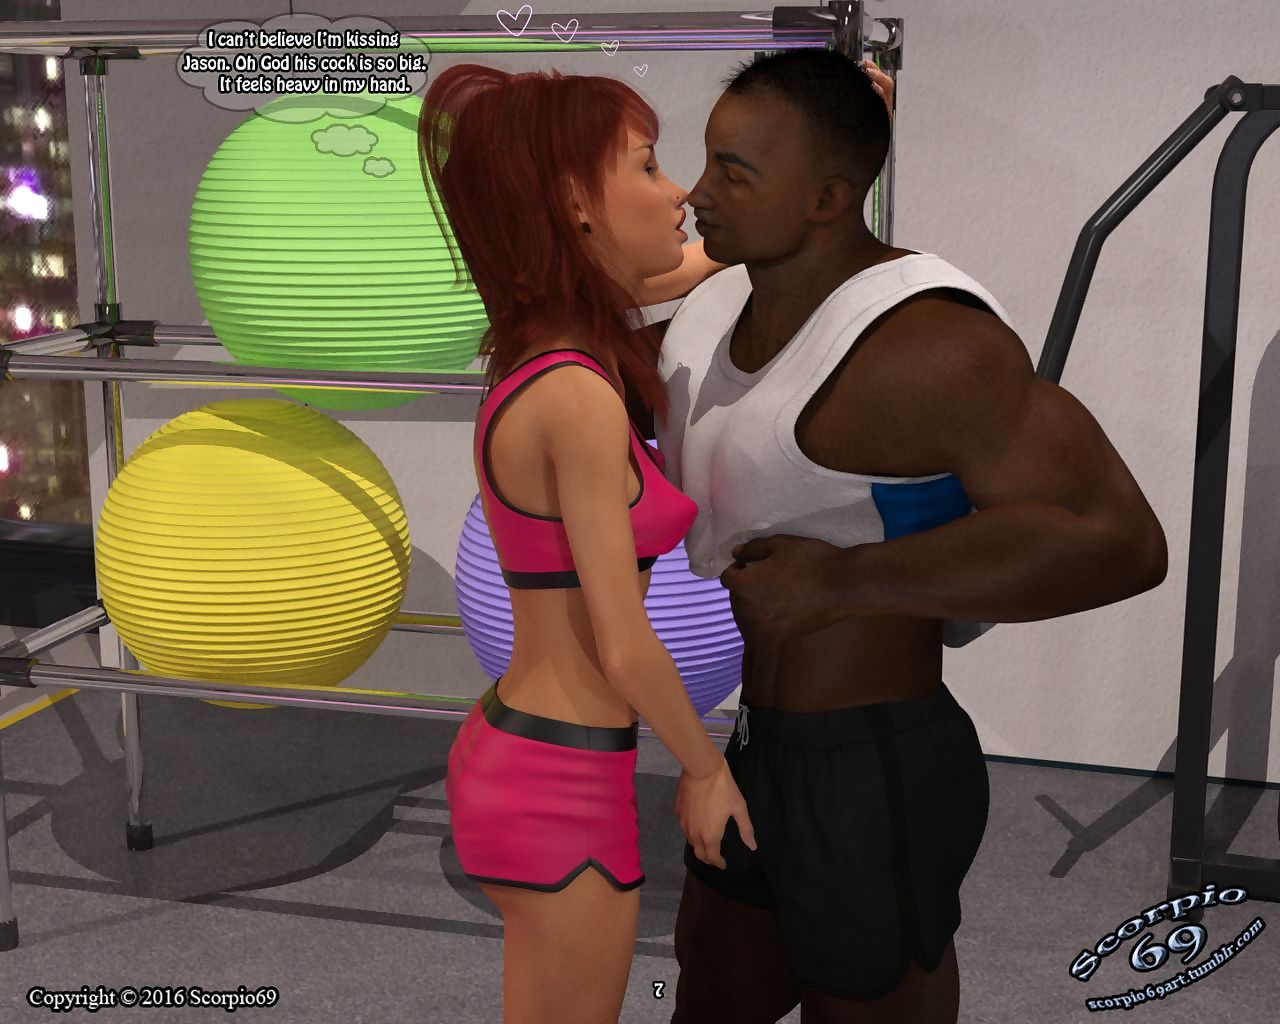 The Gym Encounter- Taboo Tales